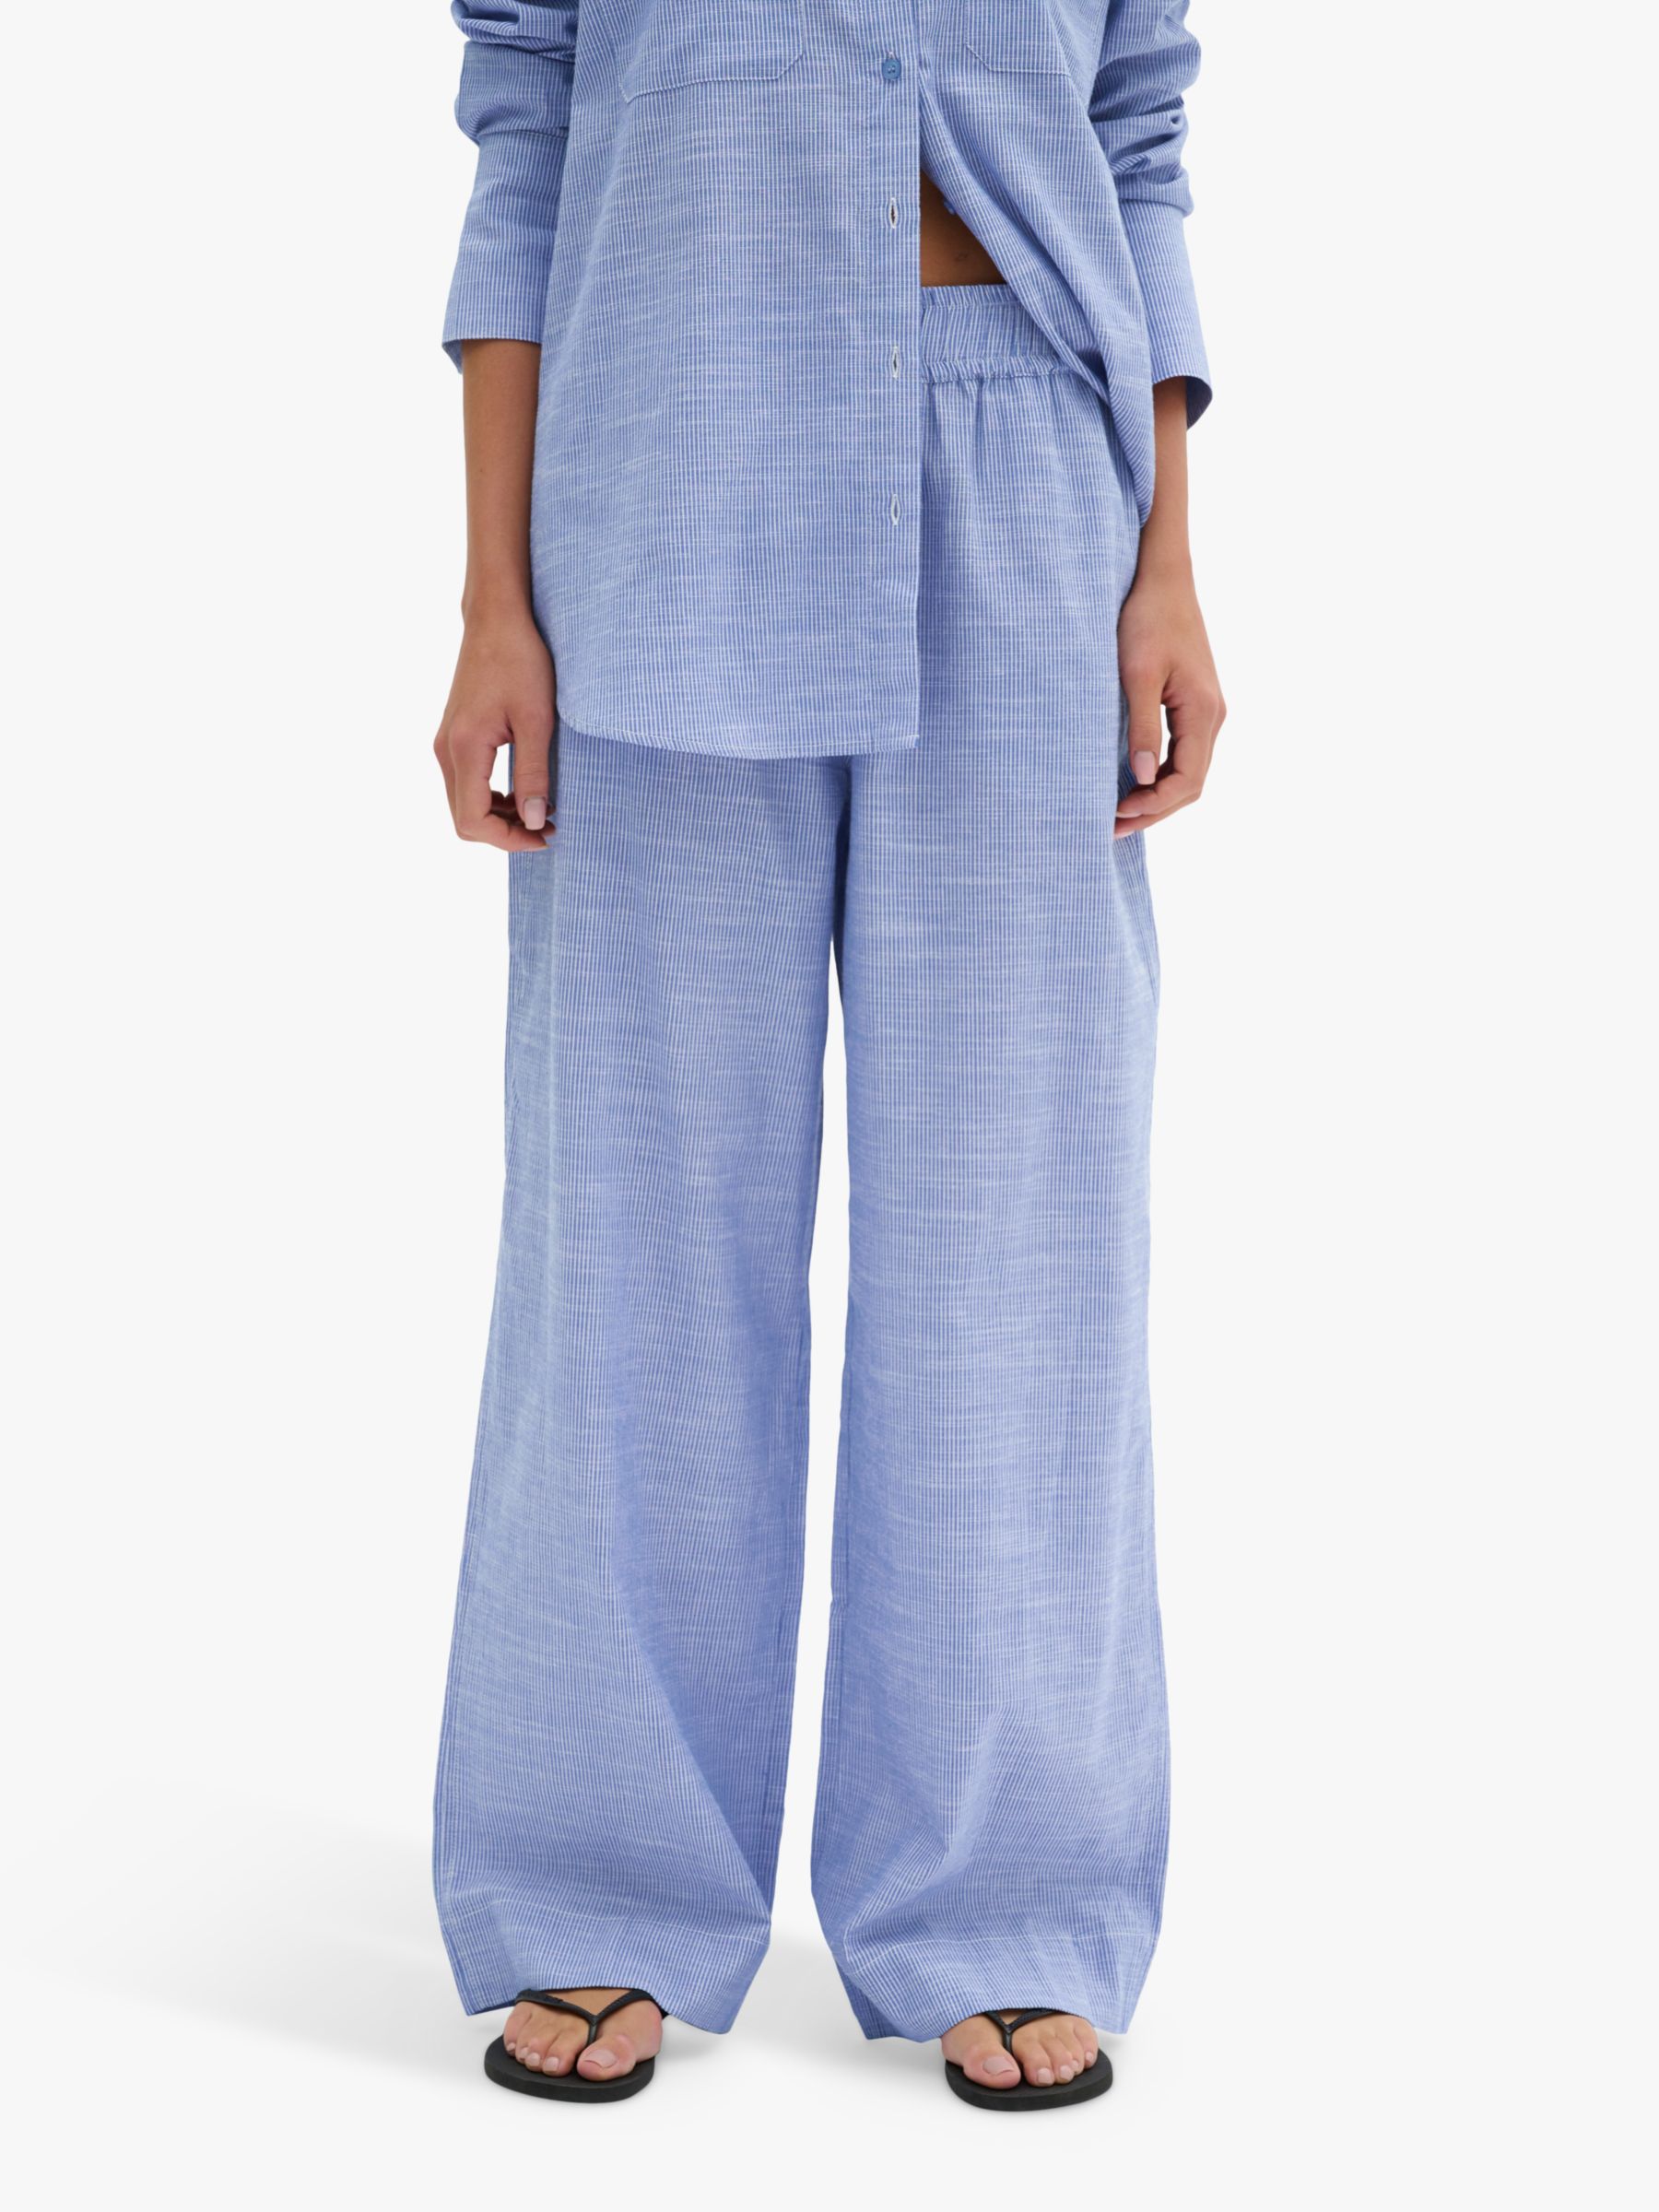 MY ESSENTIAL WARDROBE Skye High Waisted Wide Leg Trousers, Delft Blue Striped, 8